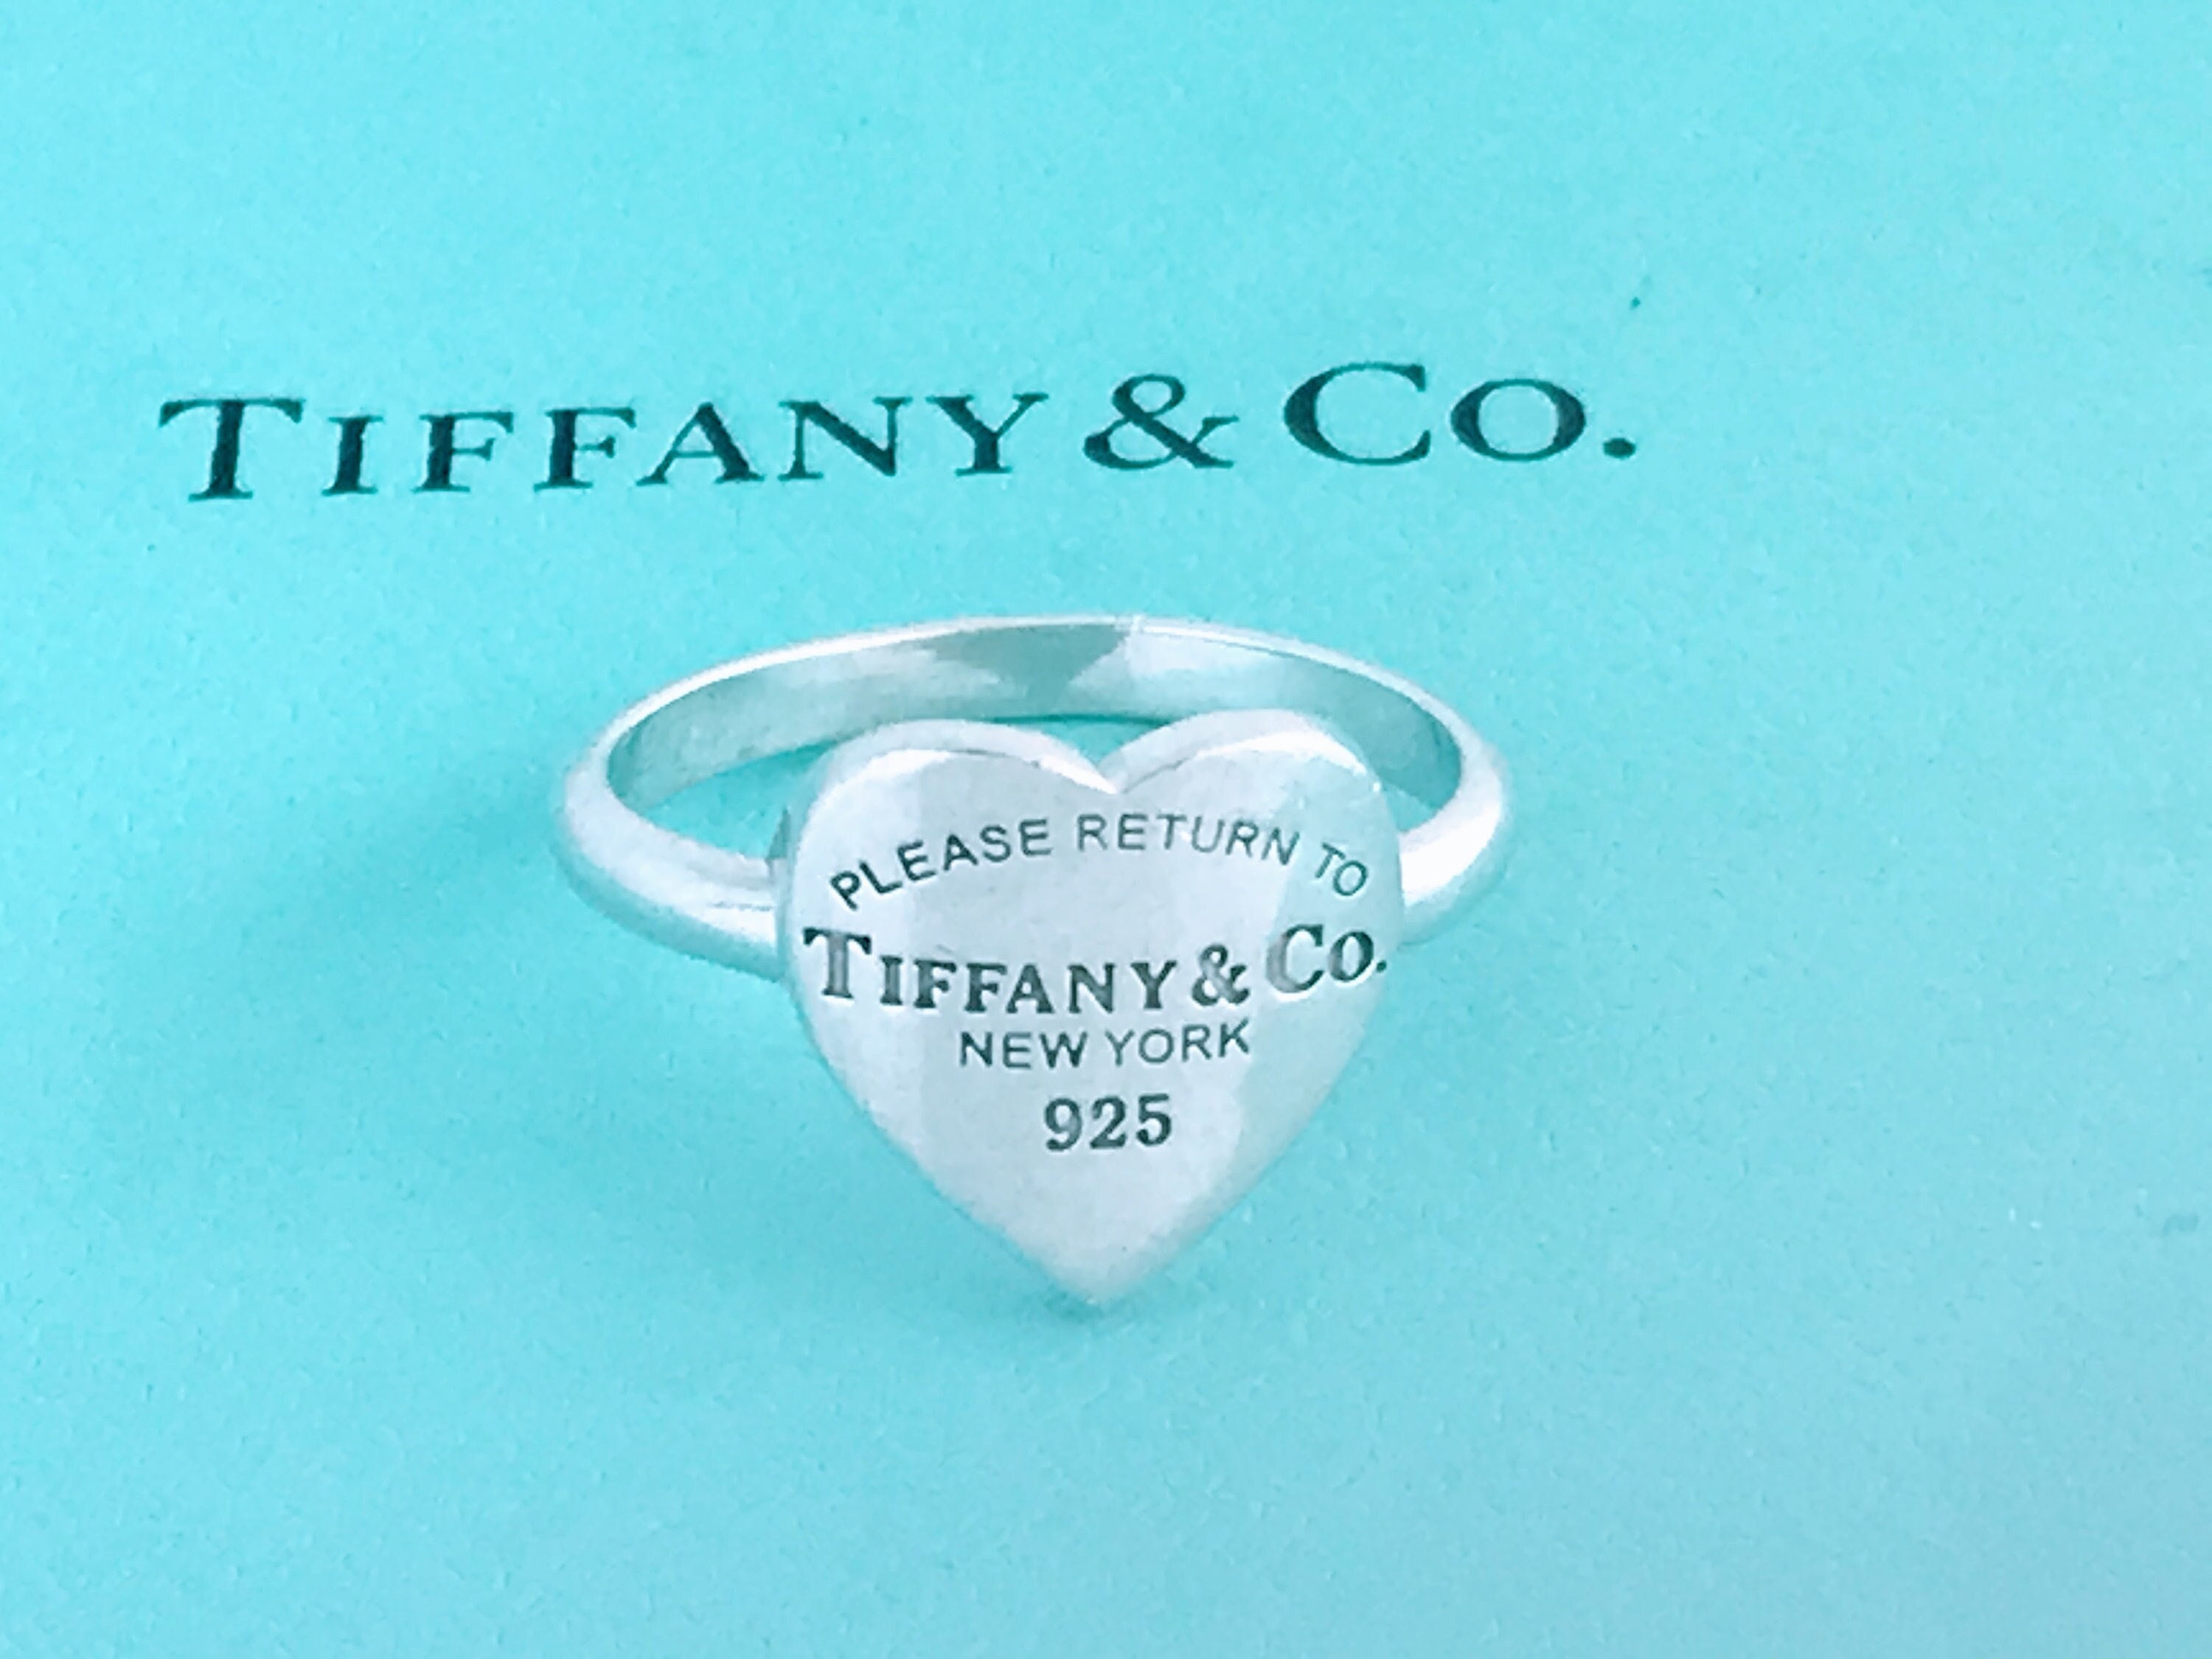 Tiffany T diamond wire band ring in 18k white gold. | Tiffany & Co.